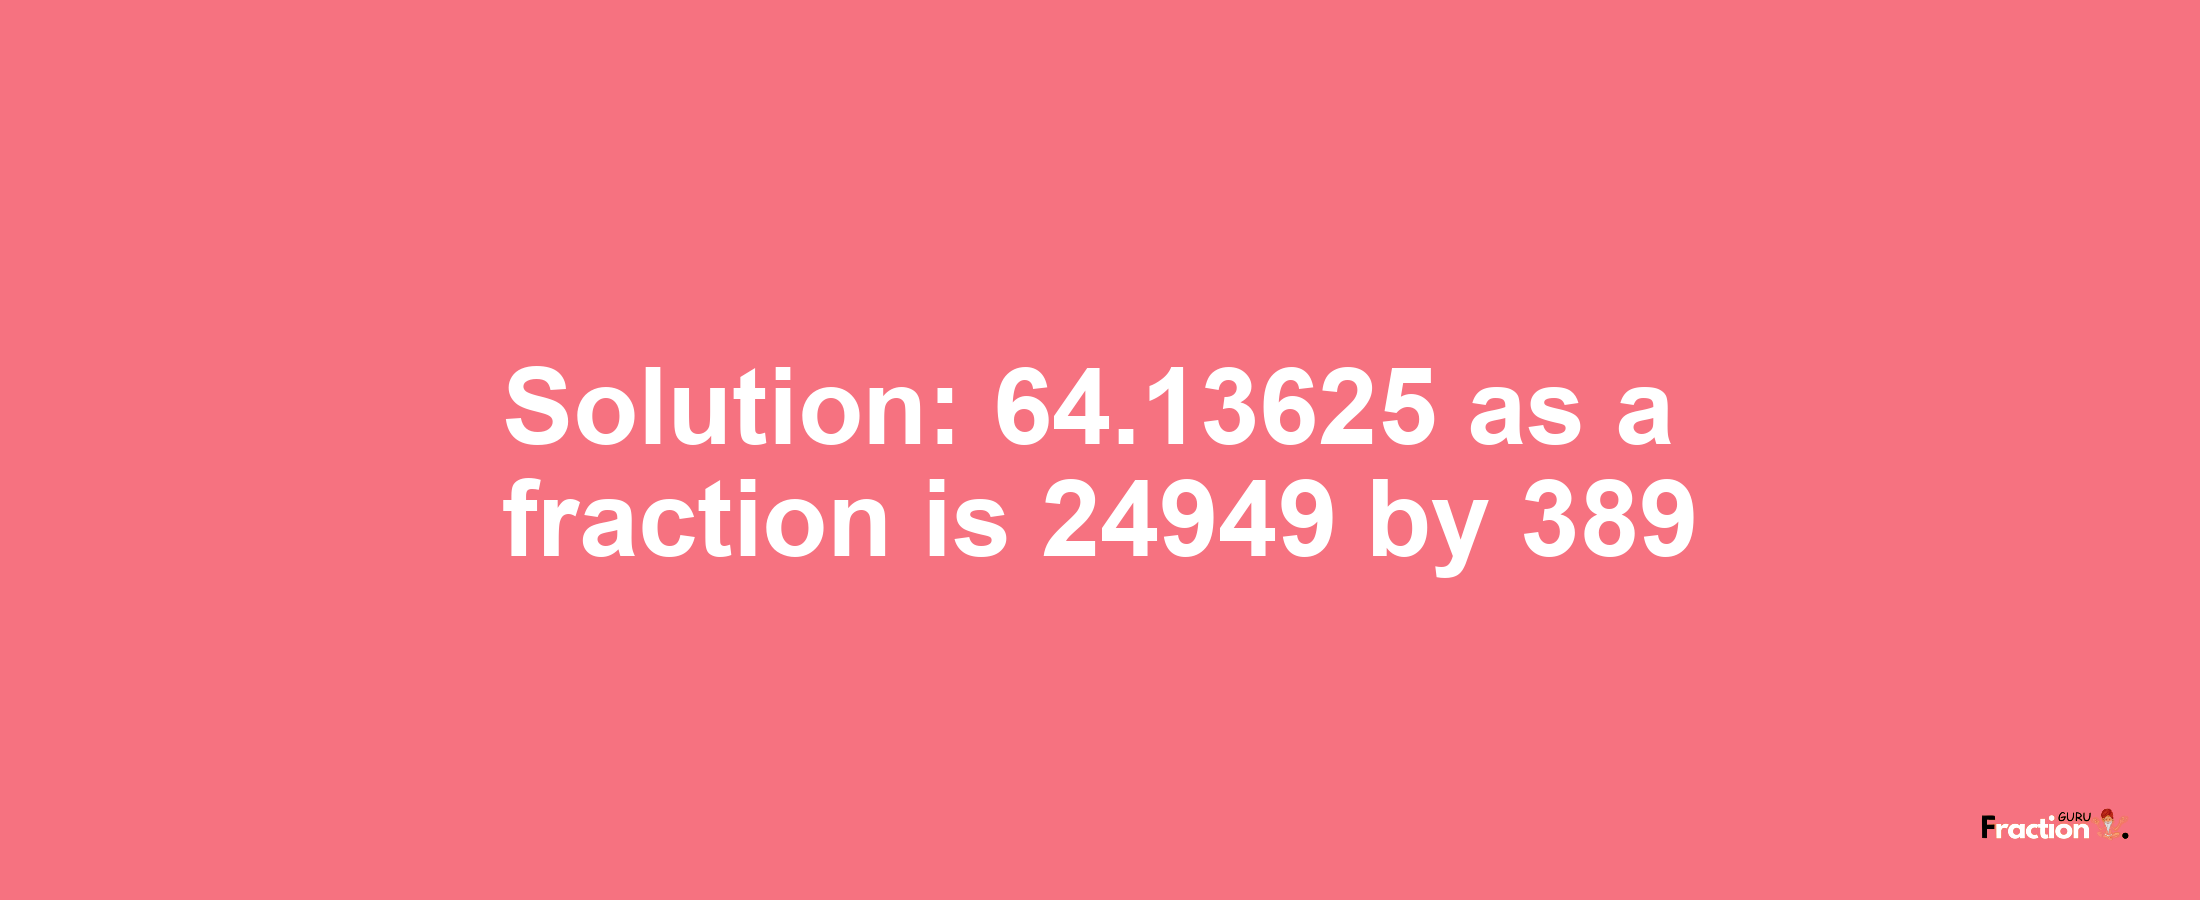 Solution:64.13625 as a fraction is 24949/389